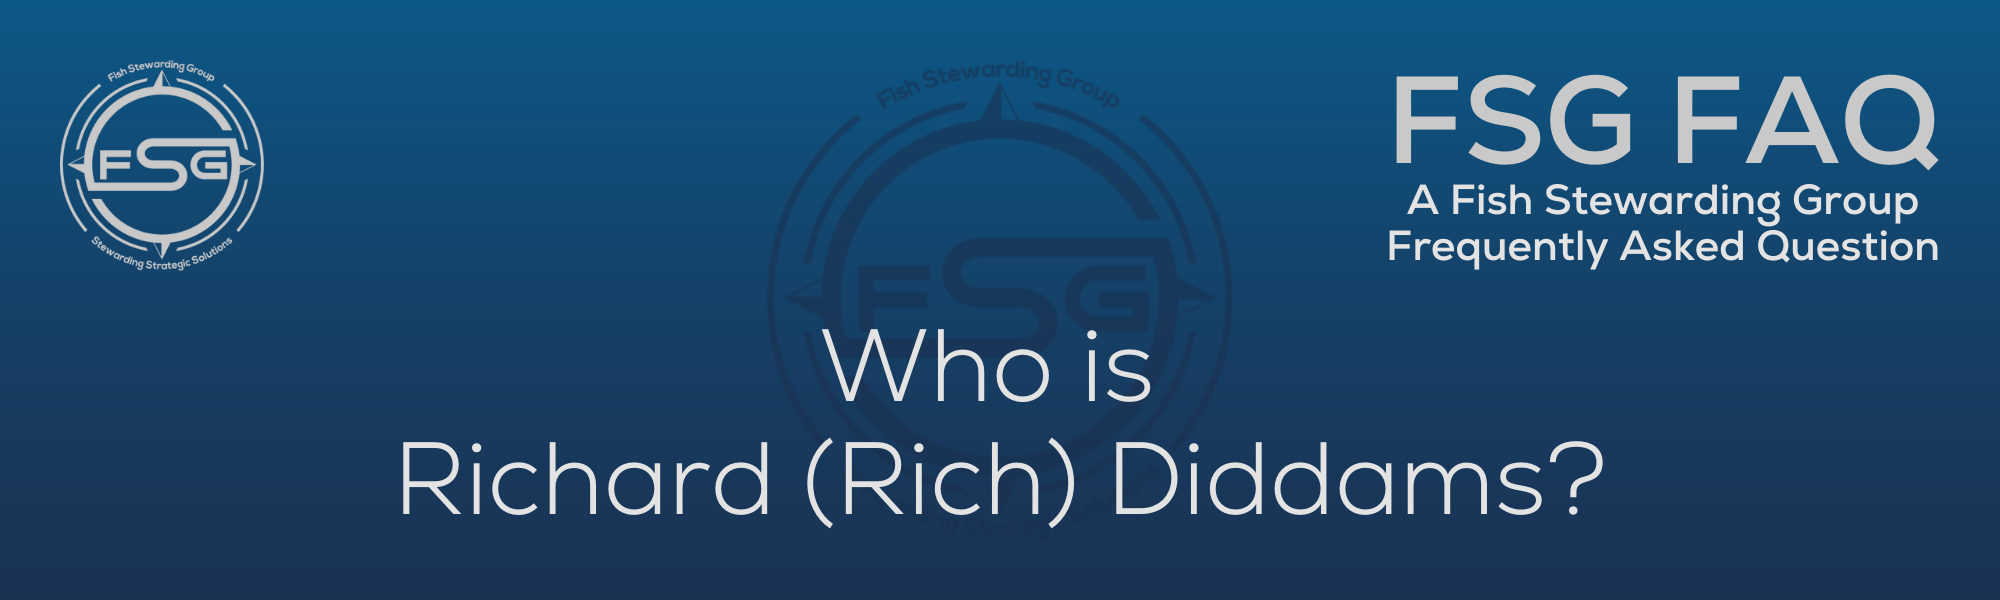 A rectangular and long thing Footer FAQ Image on the bottom of the Who is Richard Rich Diddams? Page on the website. The background is a blue gradient color that goes from a dark blue on the bottom to a lighter blue on top. The text in lower center of the image in a light gray text that reads: Who is Richard Rich Diddams? The text in gray in the upper right corner reads: FSG FAQ. Right beneath that is more gray text in a smaller font that reads: A Fish Stewarding Group Frequently Asked Question. On the upper left side is the FSG Logo in gray. The logo has the letters FSG in the middle with a circle with four pointed arrows facing north, south, east and west with the S connected to that circle. Four rounded lines make the next circle of the circle and the last layer is a thin circle with the text on the Bottom that reads Stewarding Strategist Solutions and on top, the text reads Fish Stewarding Group. And Lastly in the center background of the image is a watermarked FSG logo, faded in blue, in the background.